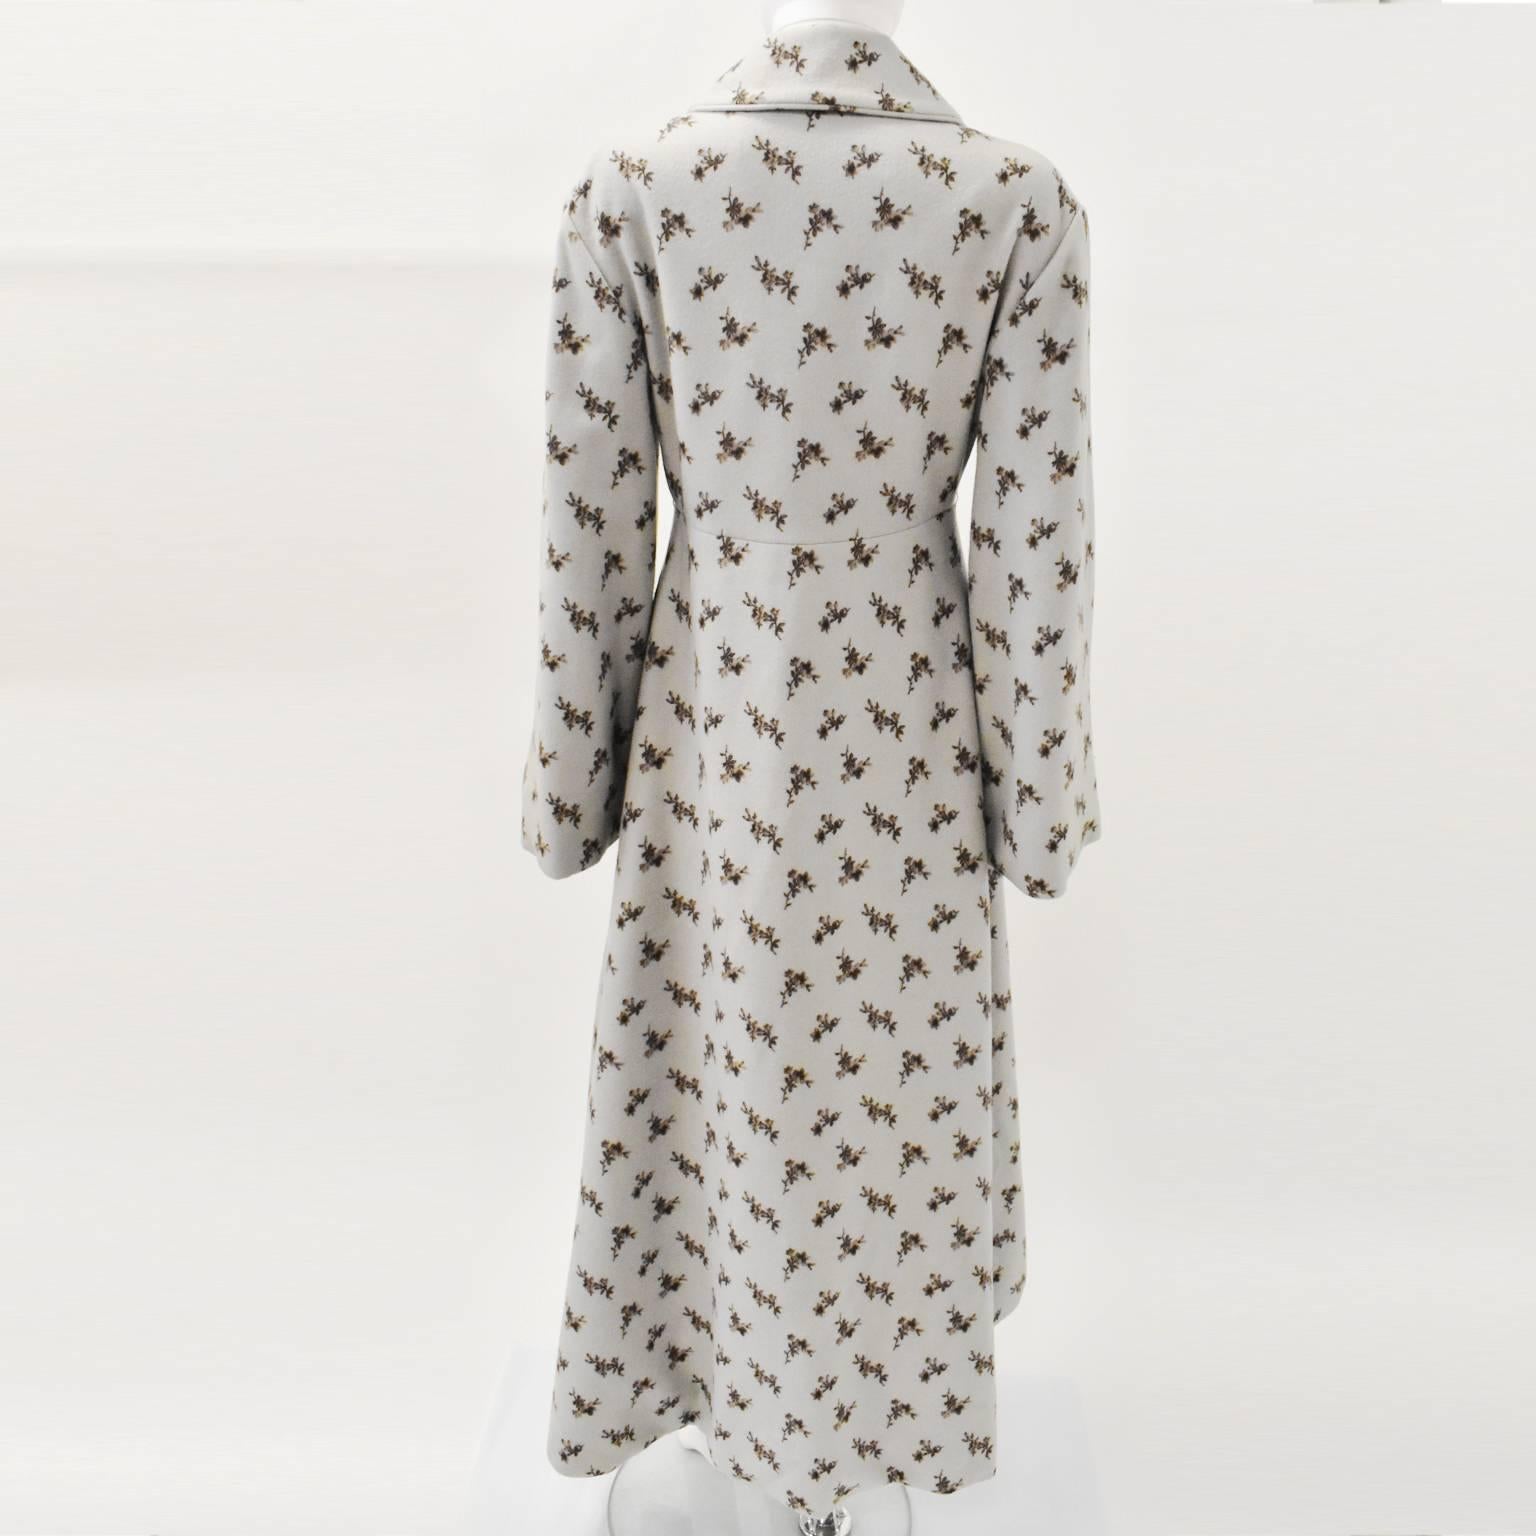 Louis Vuitton Pale Blue Floral Coat 2013 In Good Condition For Sale In London, GB